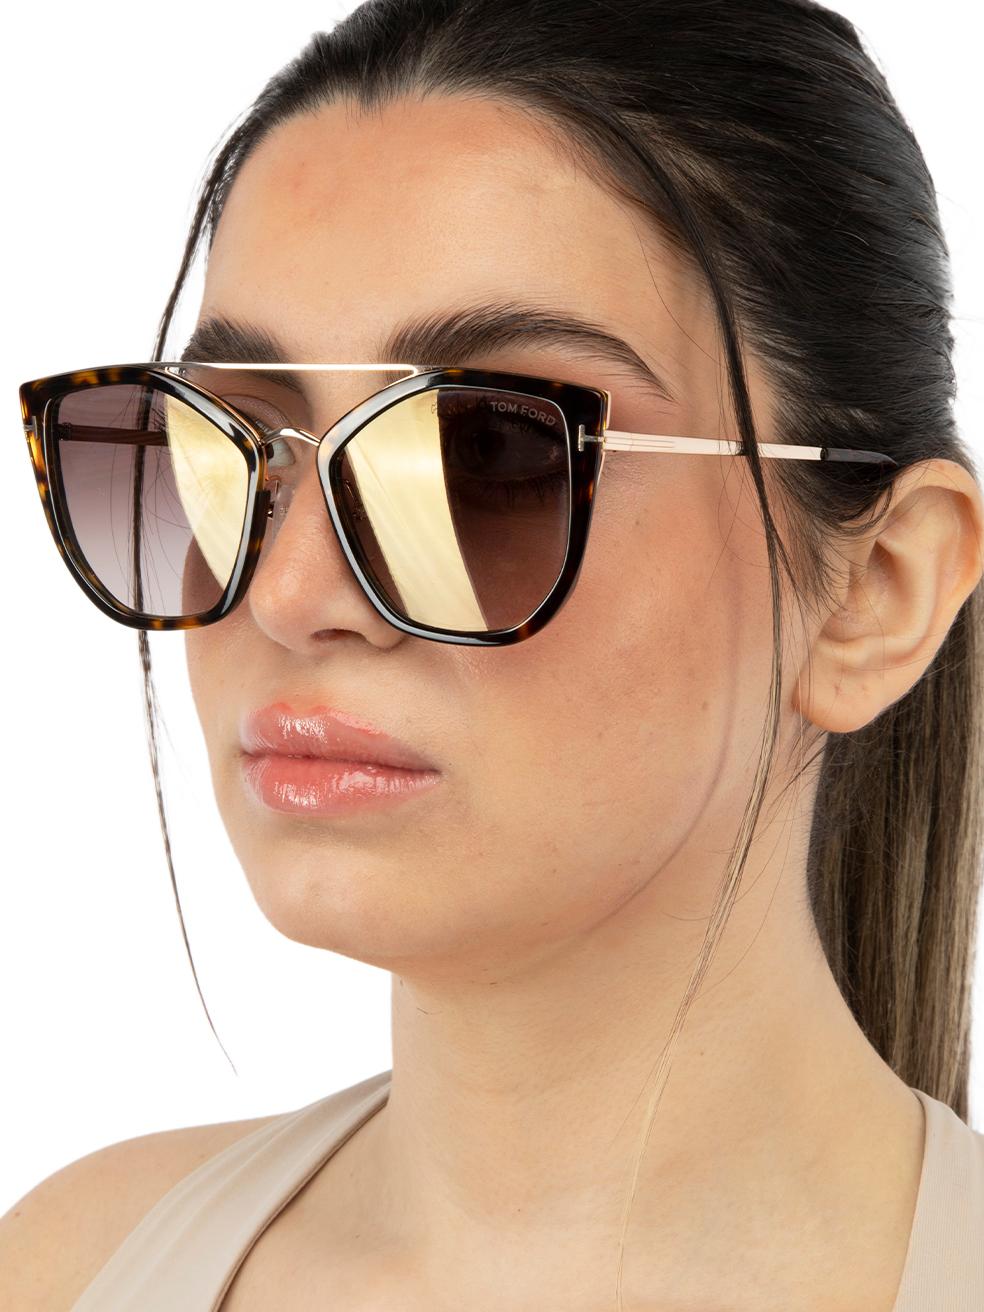 CONDITION is New with tags on this brand new Tom Ford designer item. This item comes with original packaging.
 
 
 
 Details
 
 
 Model: FT0648
 
 Dark Havana
 
 Acetate
 
 Cat Eye Sunglasses
 
 Brown Gradient Lens
 
 Full-Rim
 
 100% UV protection
